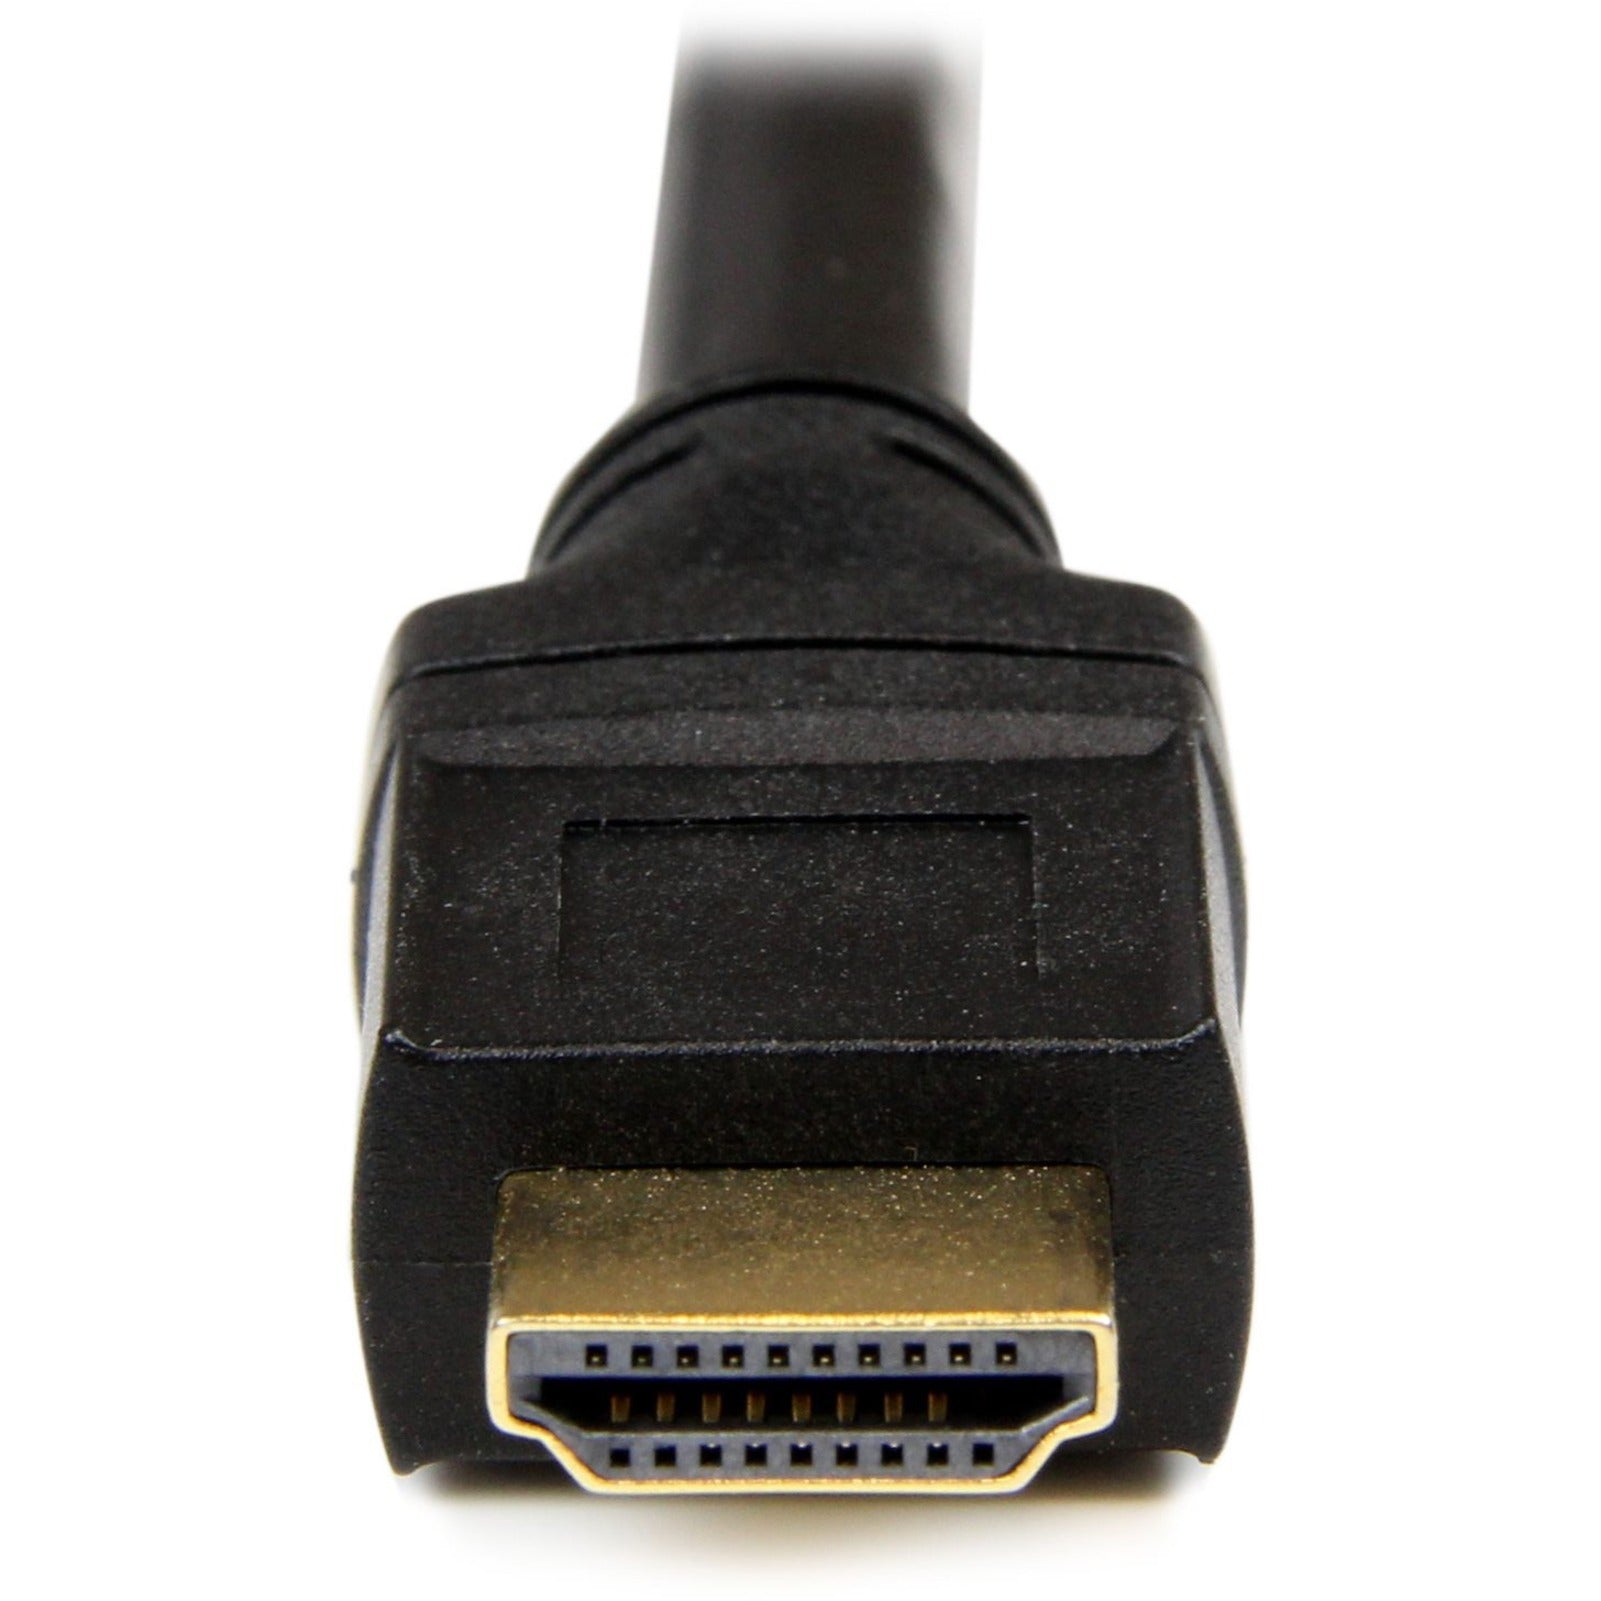 StarTech.com HDPMM50 50 ft 15m Plenum-Rated High Speed HDMI Cable - HDMI to HDMI - M/M, Corrosion-free, EMI Protection, HDCP 1.4, Audio Return Channel (ARC), Consumer Electronics Control (CEC), Strain Relief, Signal Booster